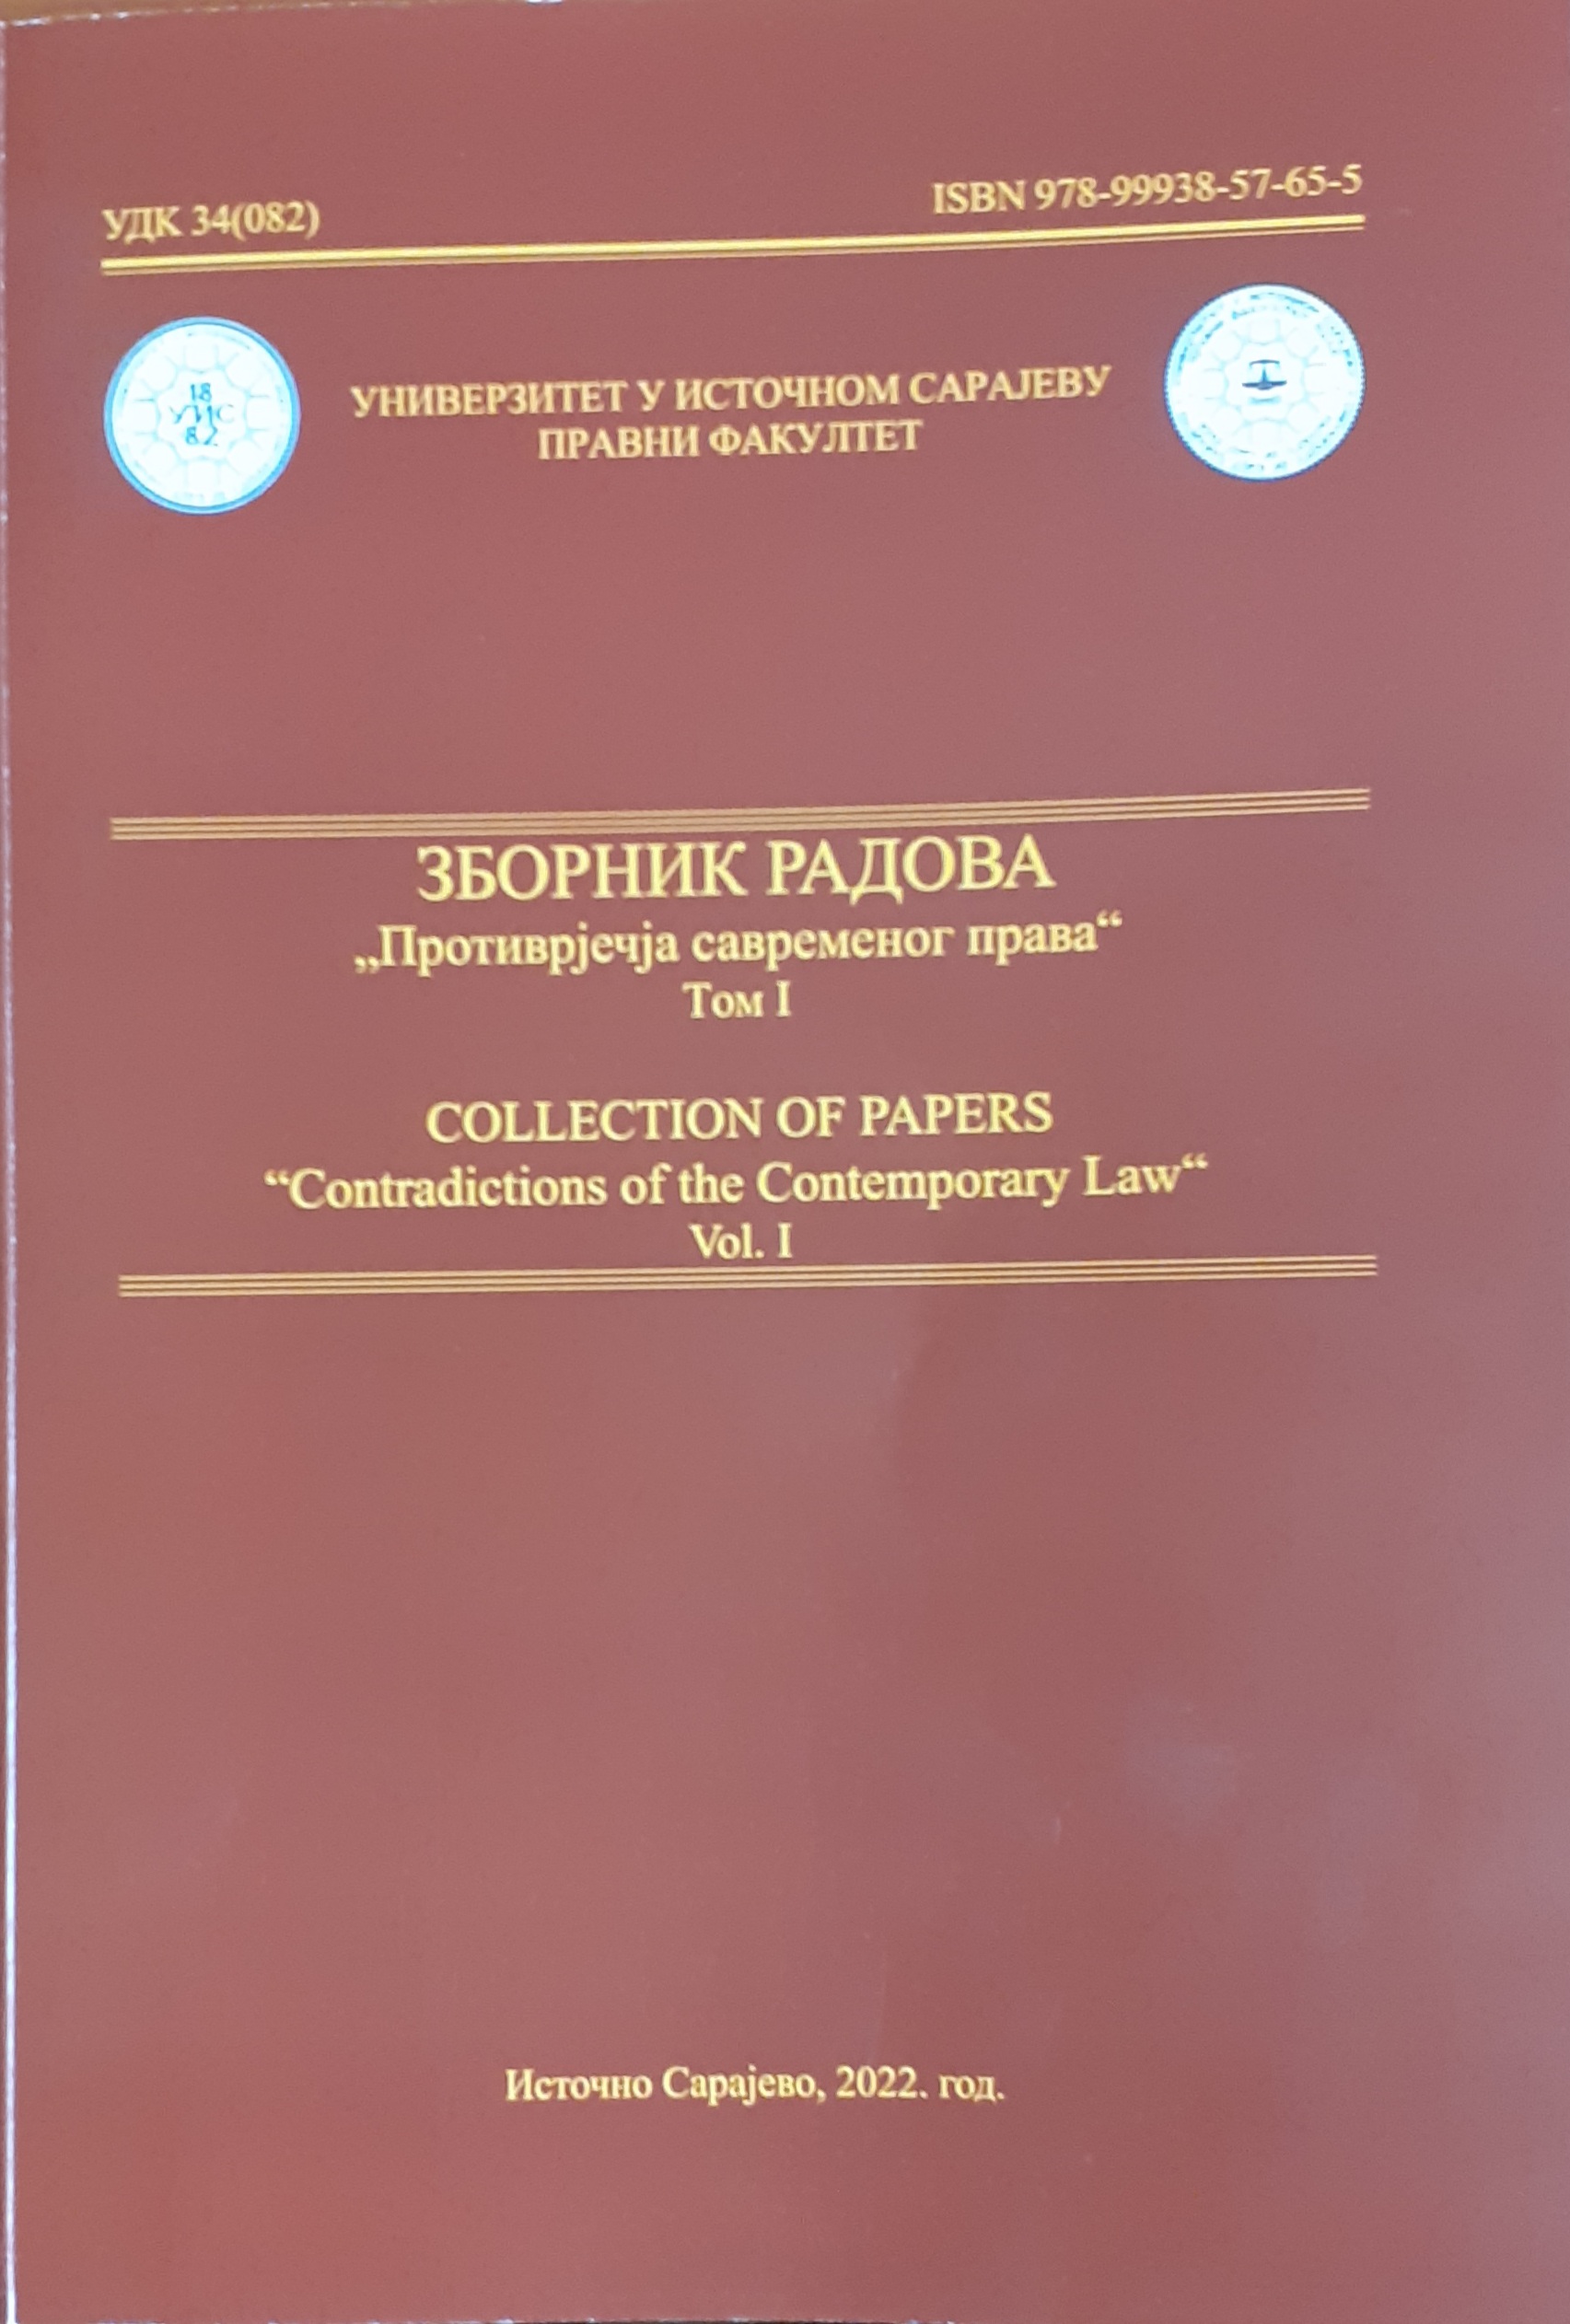 Collection of papers " Contradictions of the Contemporary Law" Vol I